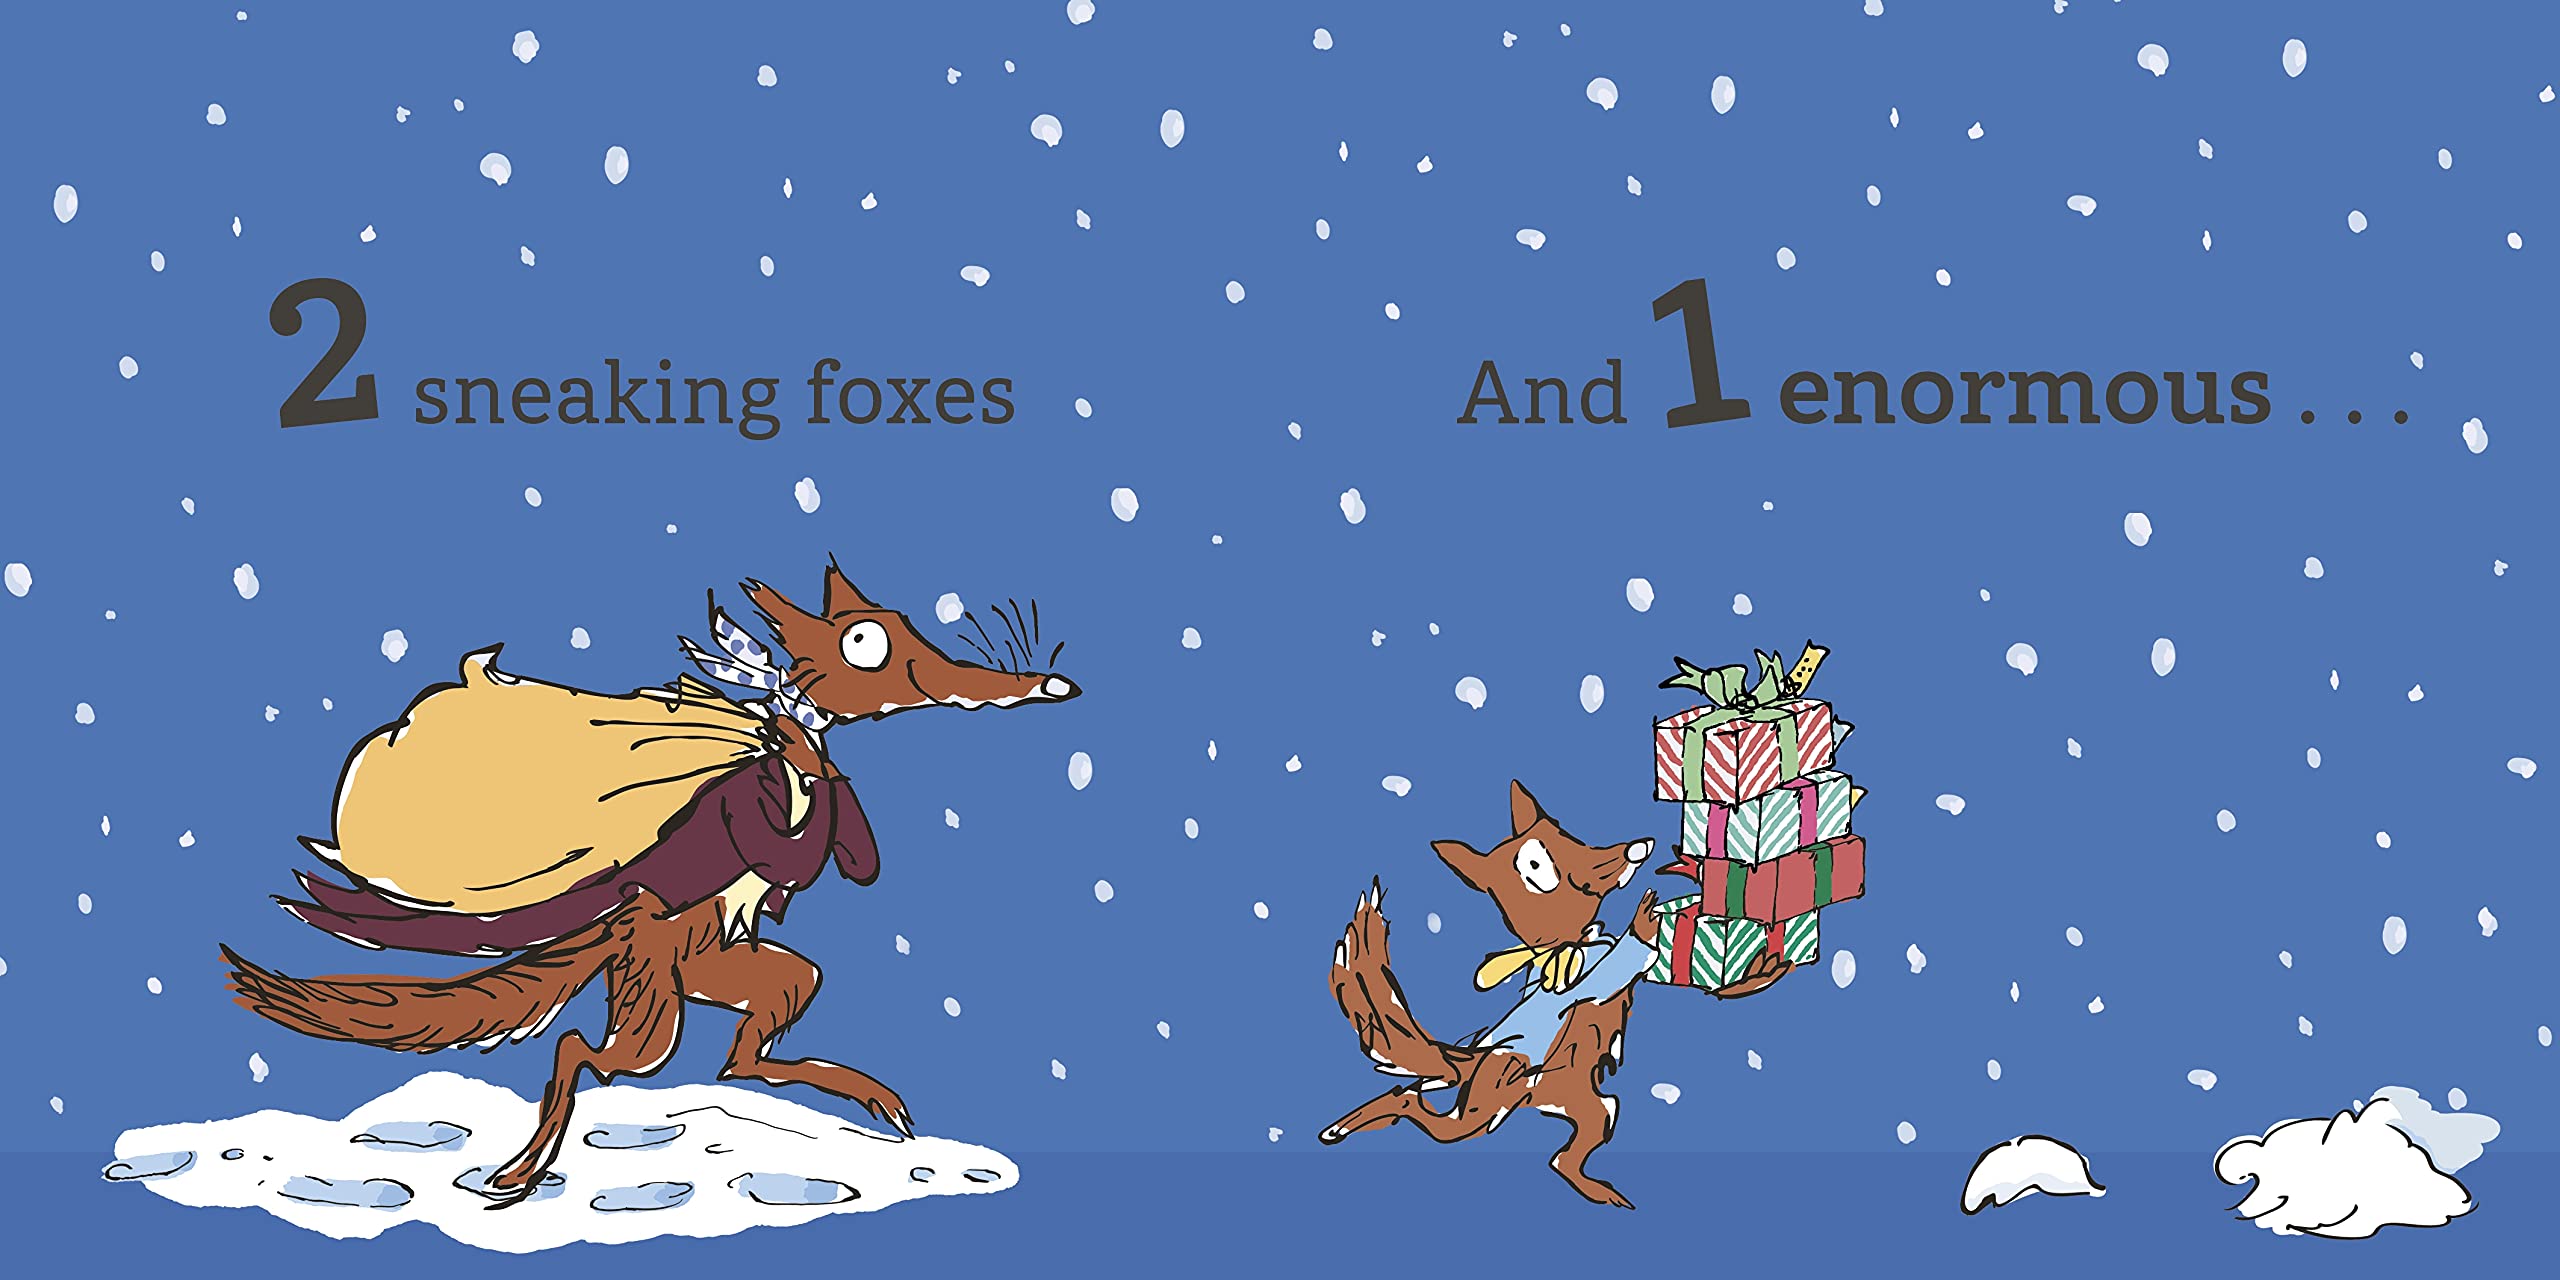 Roald Dahl : On the First Day of Christmas